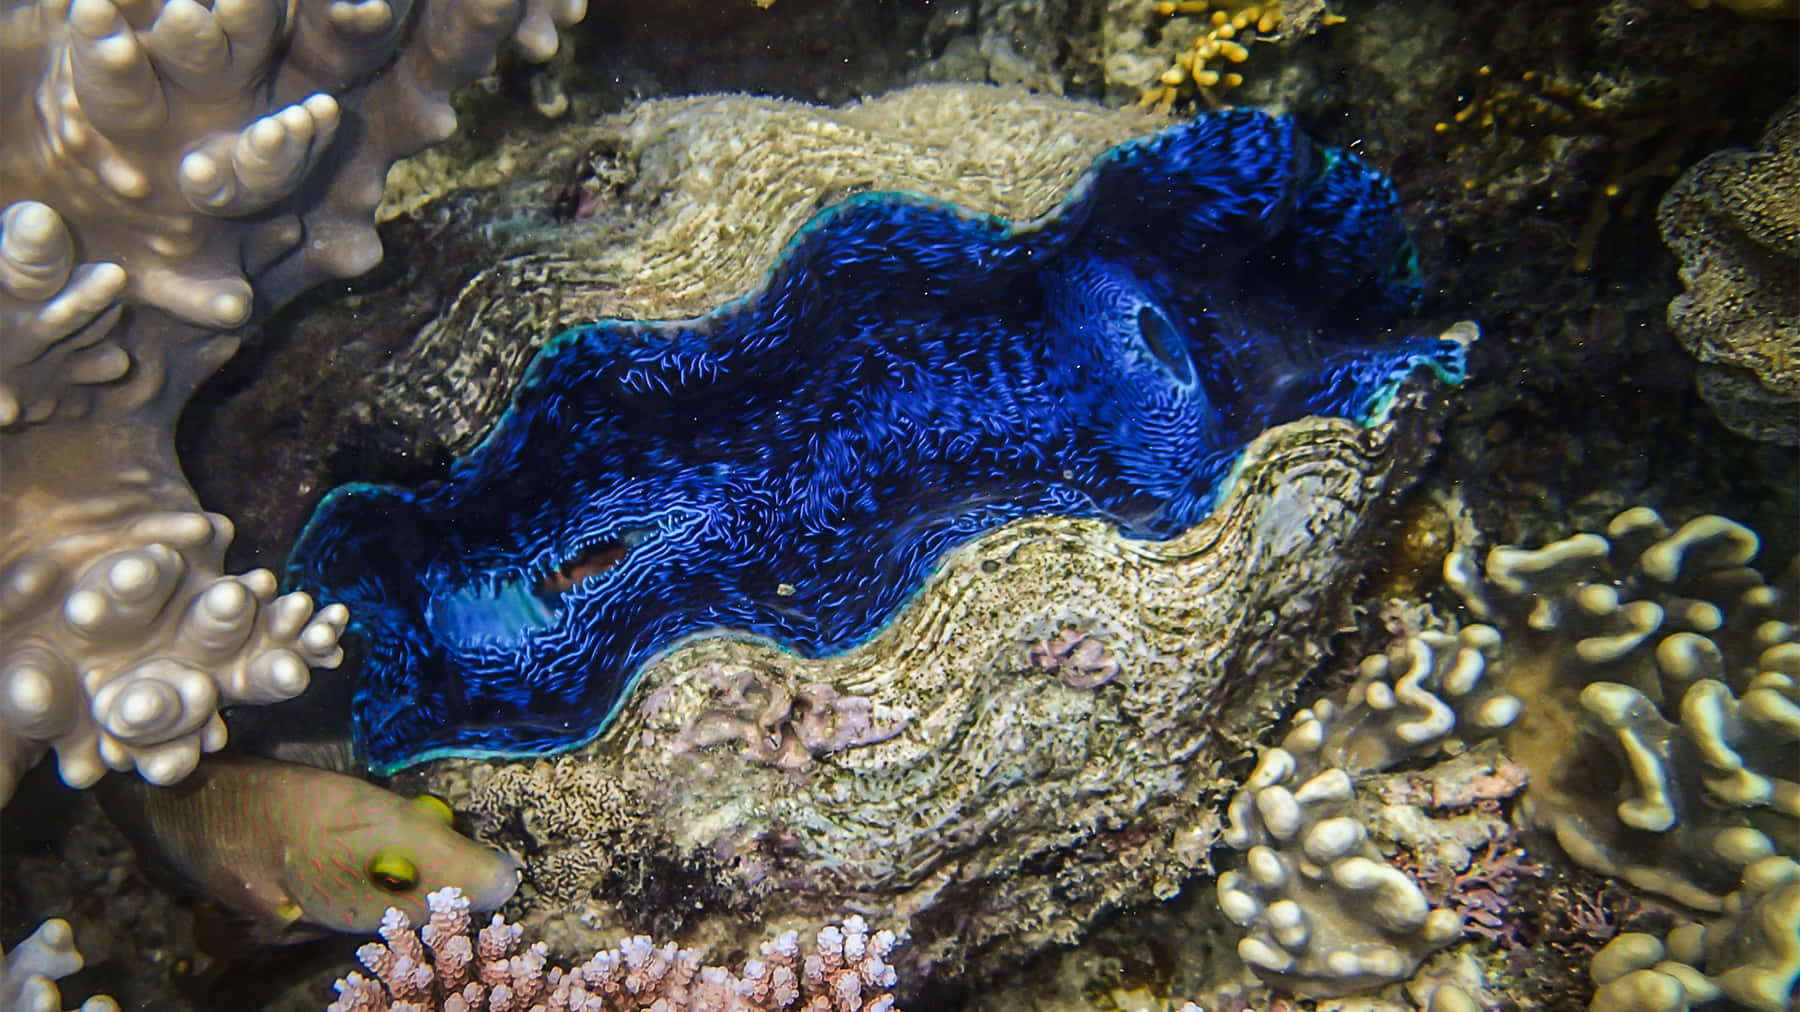 Spectacular Underwater Snapshot Of A Giant Clam Wallpaper